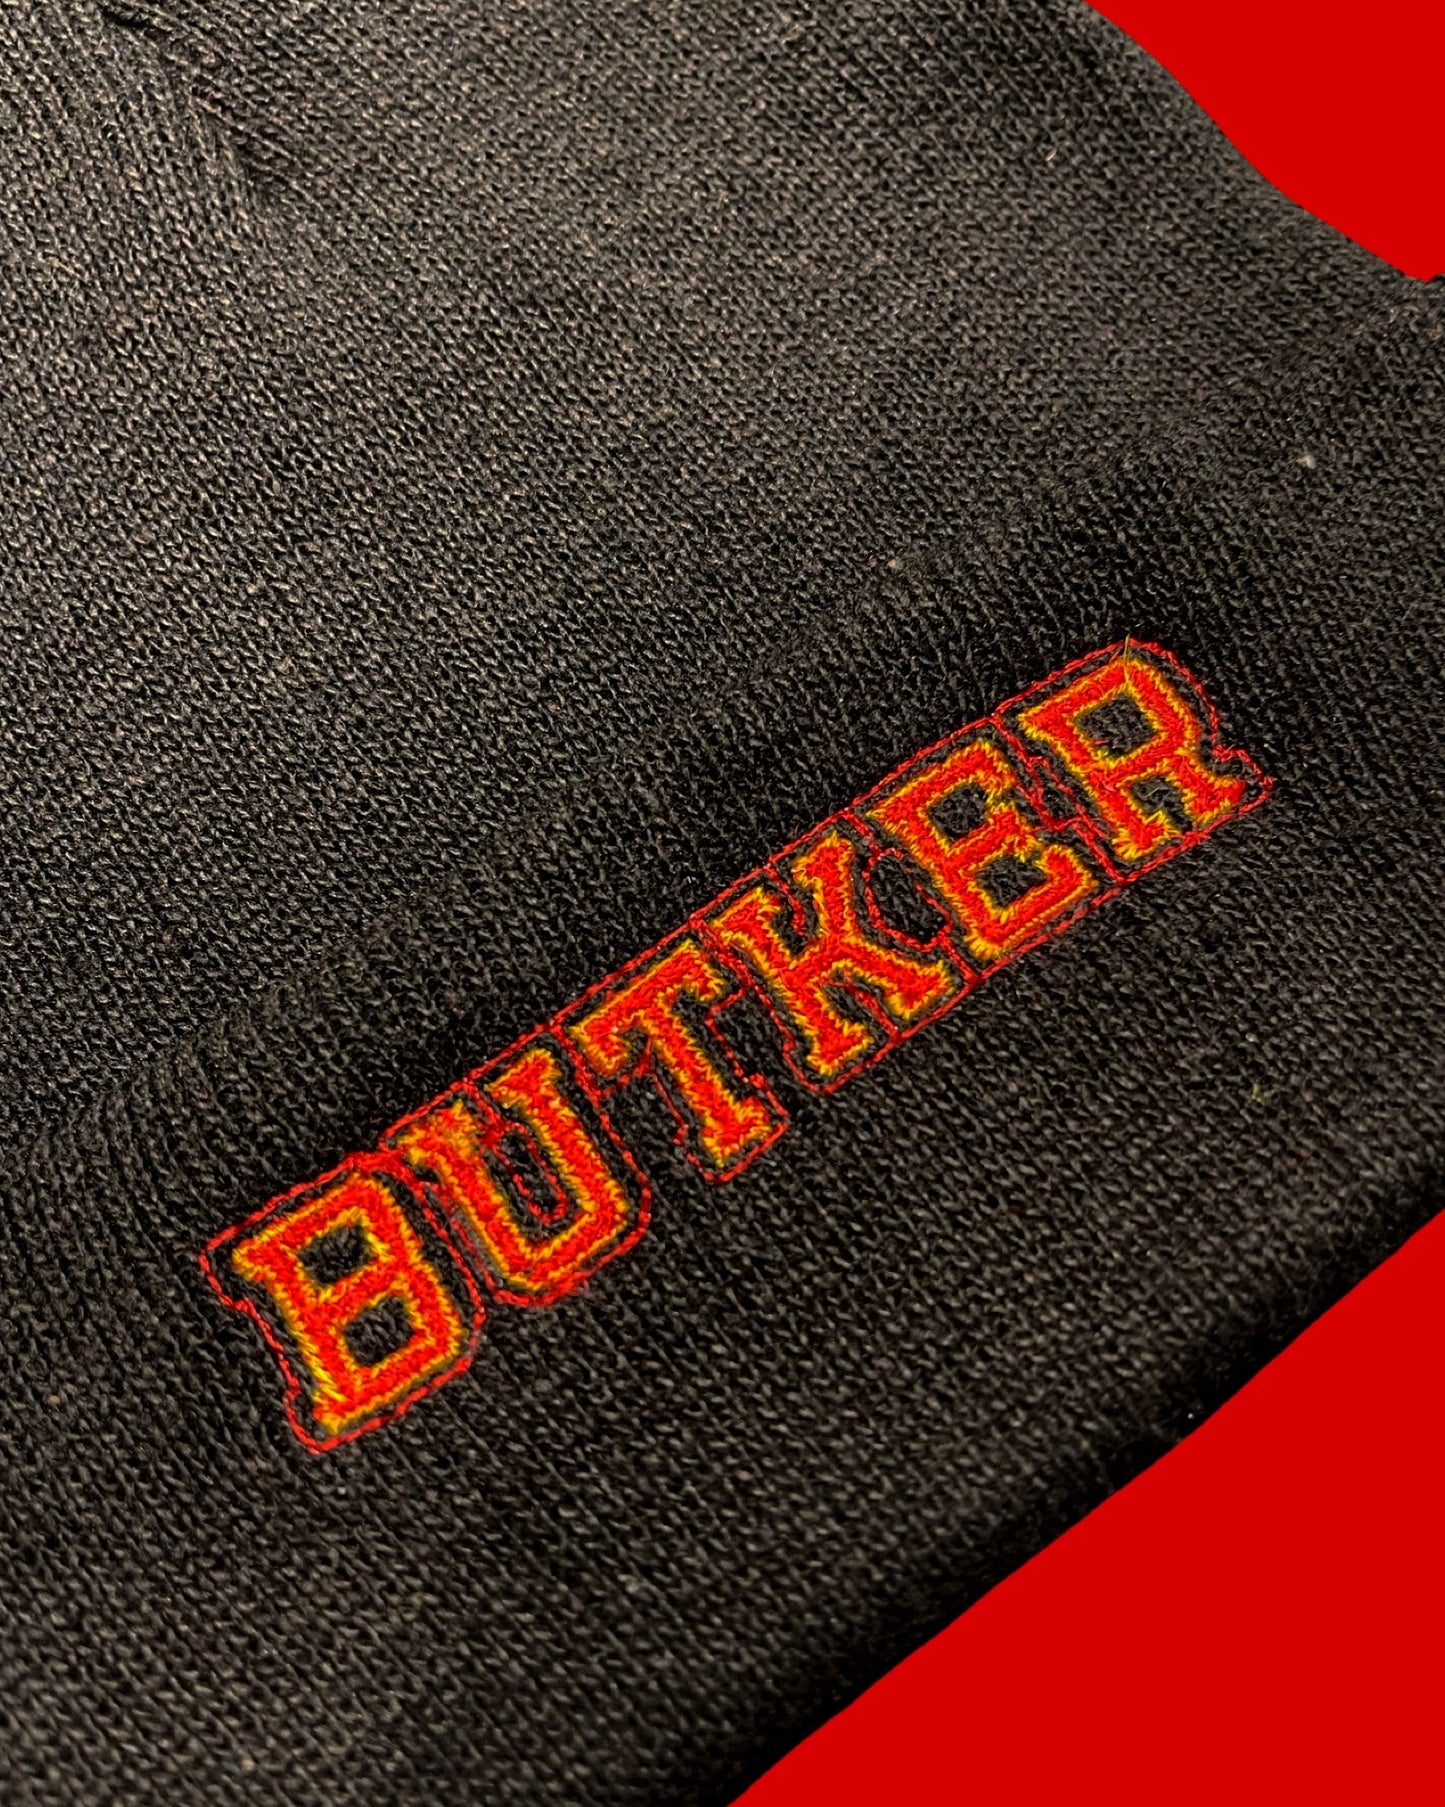 detail view of red and yellow embroidery "BUTKER"